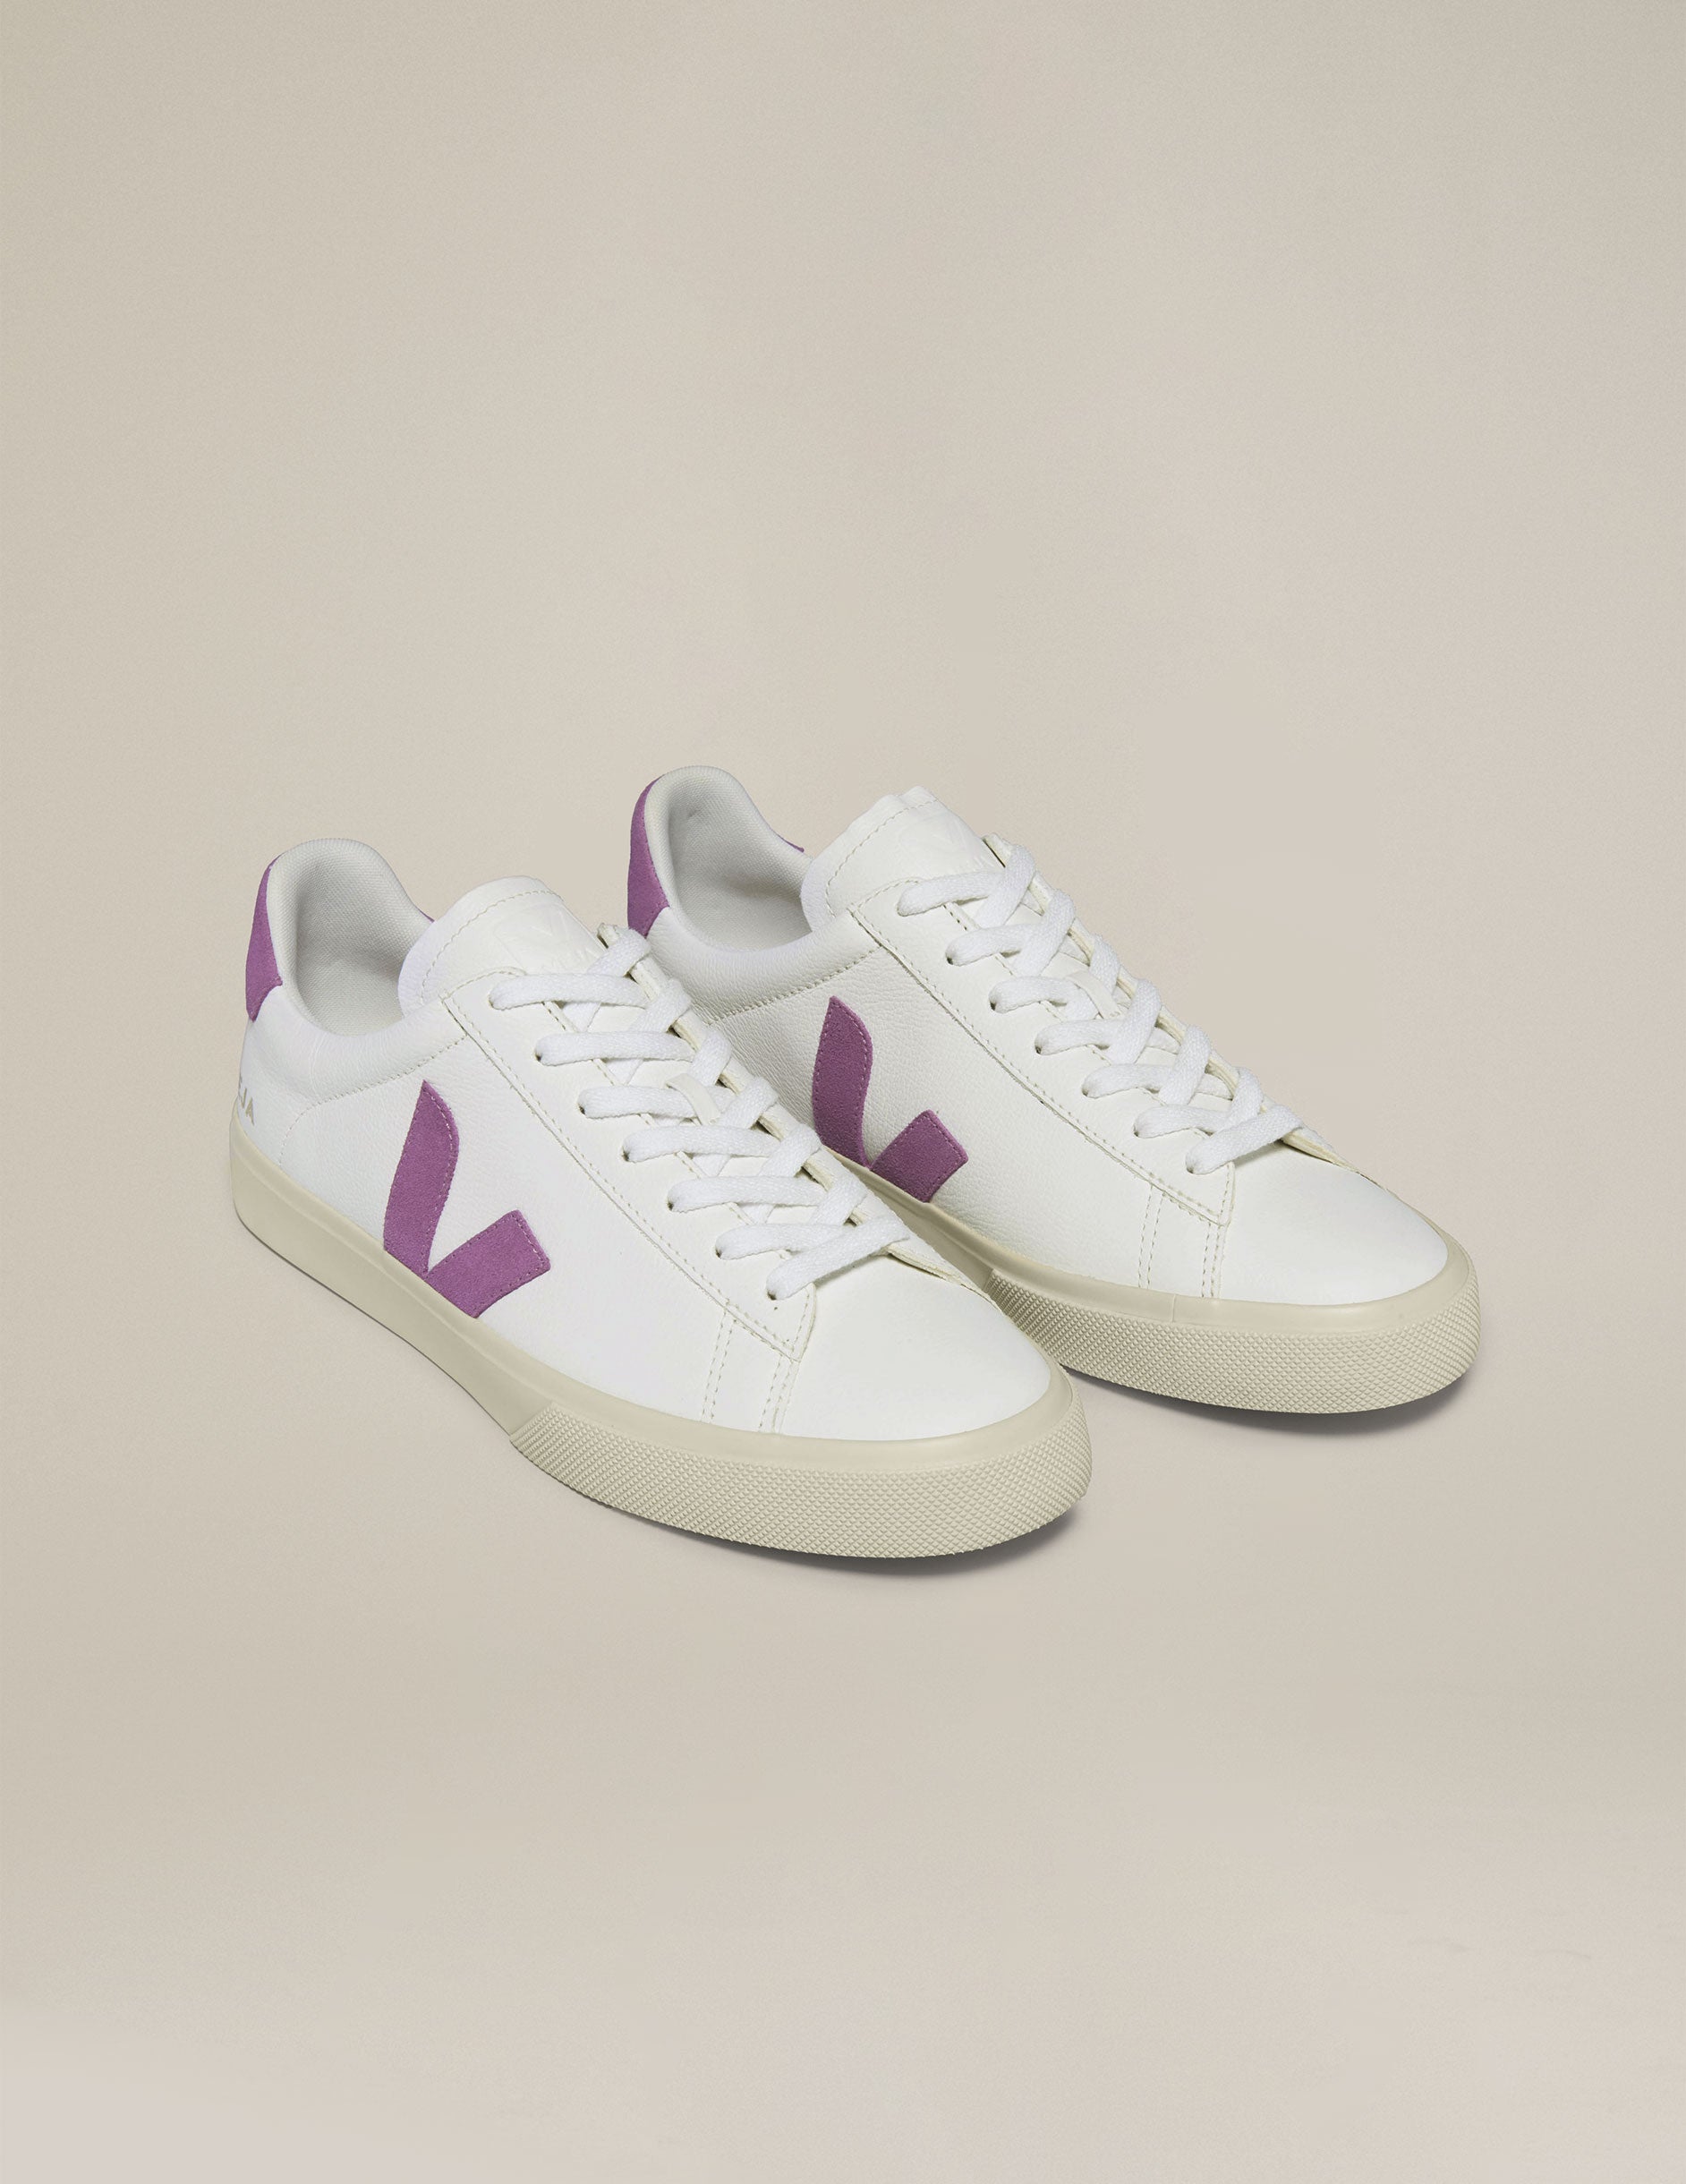 white and purple Veja sneakers.